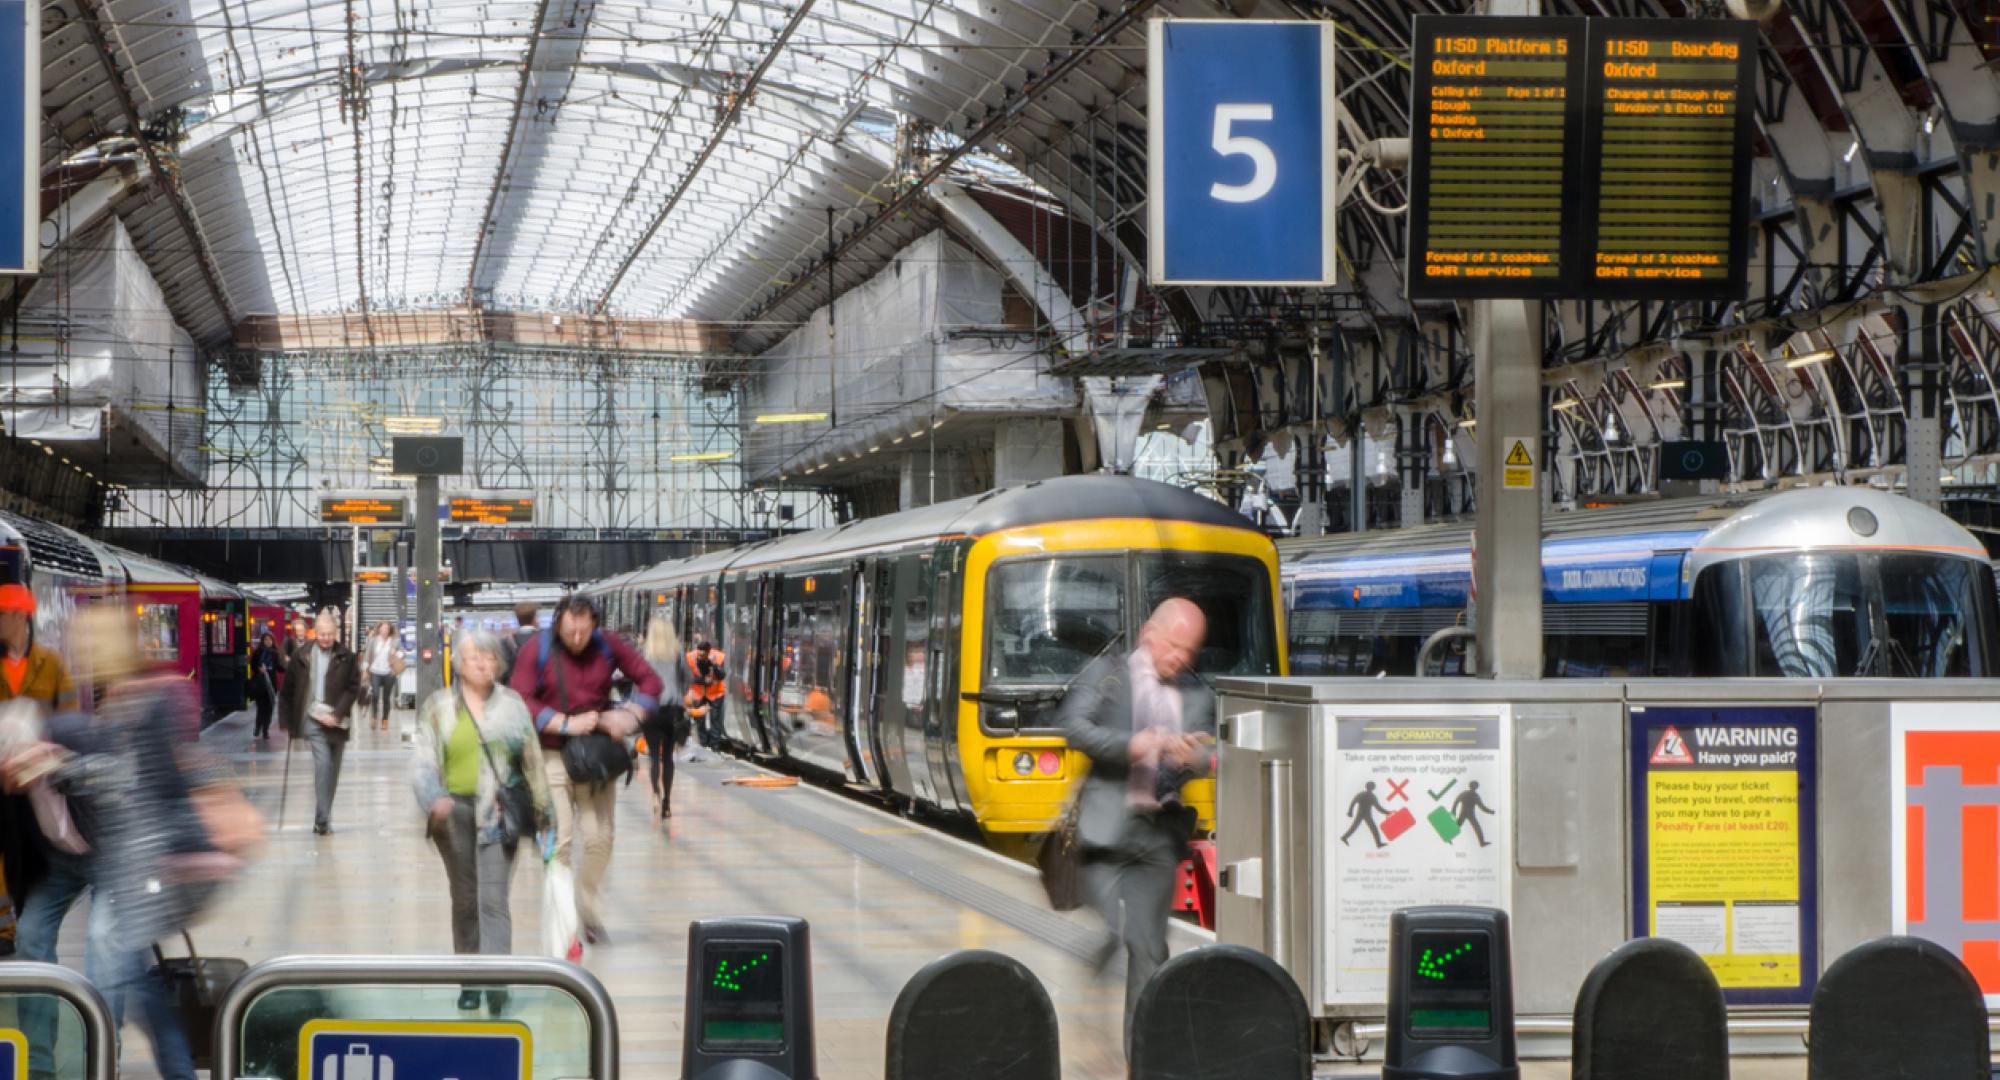 ORR appoints provider and strengthens Rail Ombudsman scheme